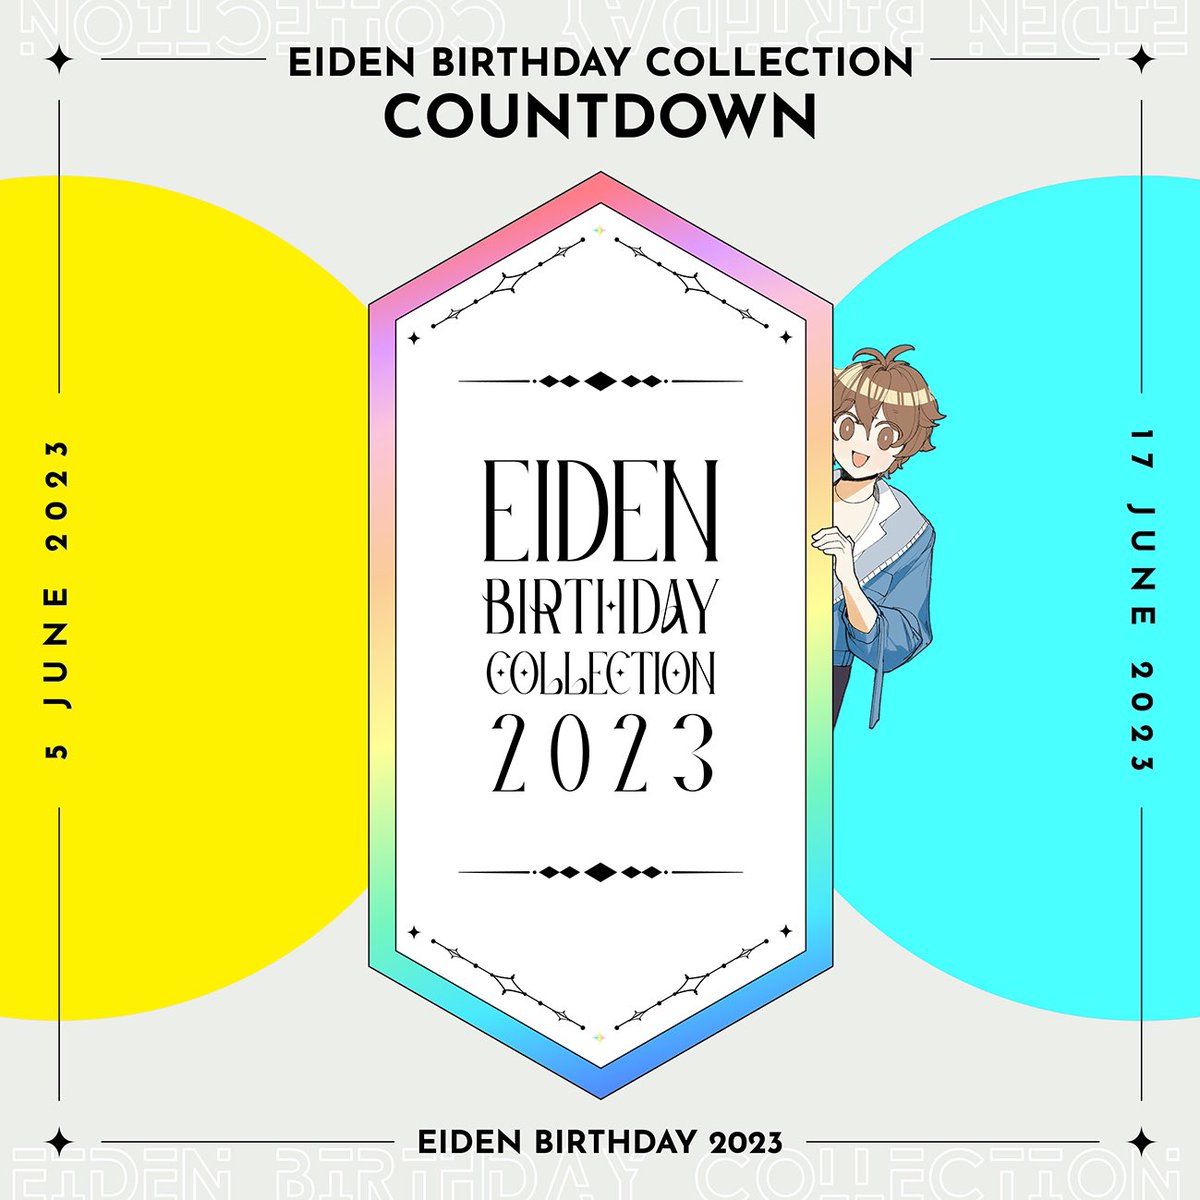 Eiden Birthday Collection Trailer! From 5 June 2023 I will start posting drawing of Eiden until his birthday on 17 June 2023! Hope you all enjoy the countdown together !